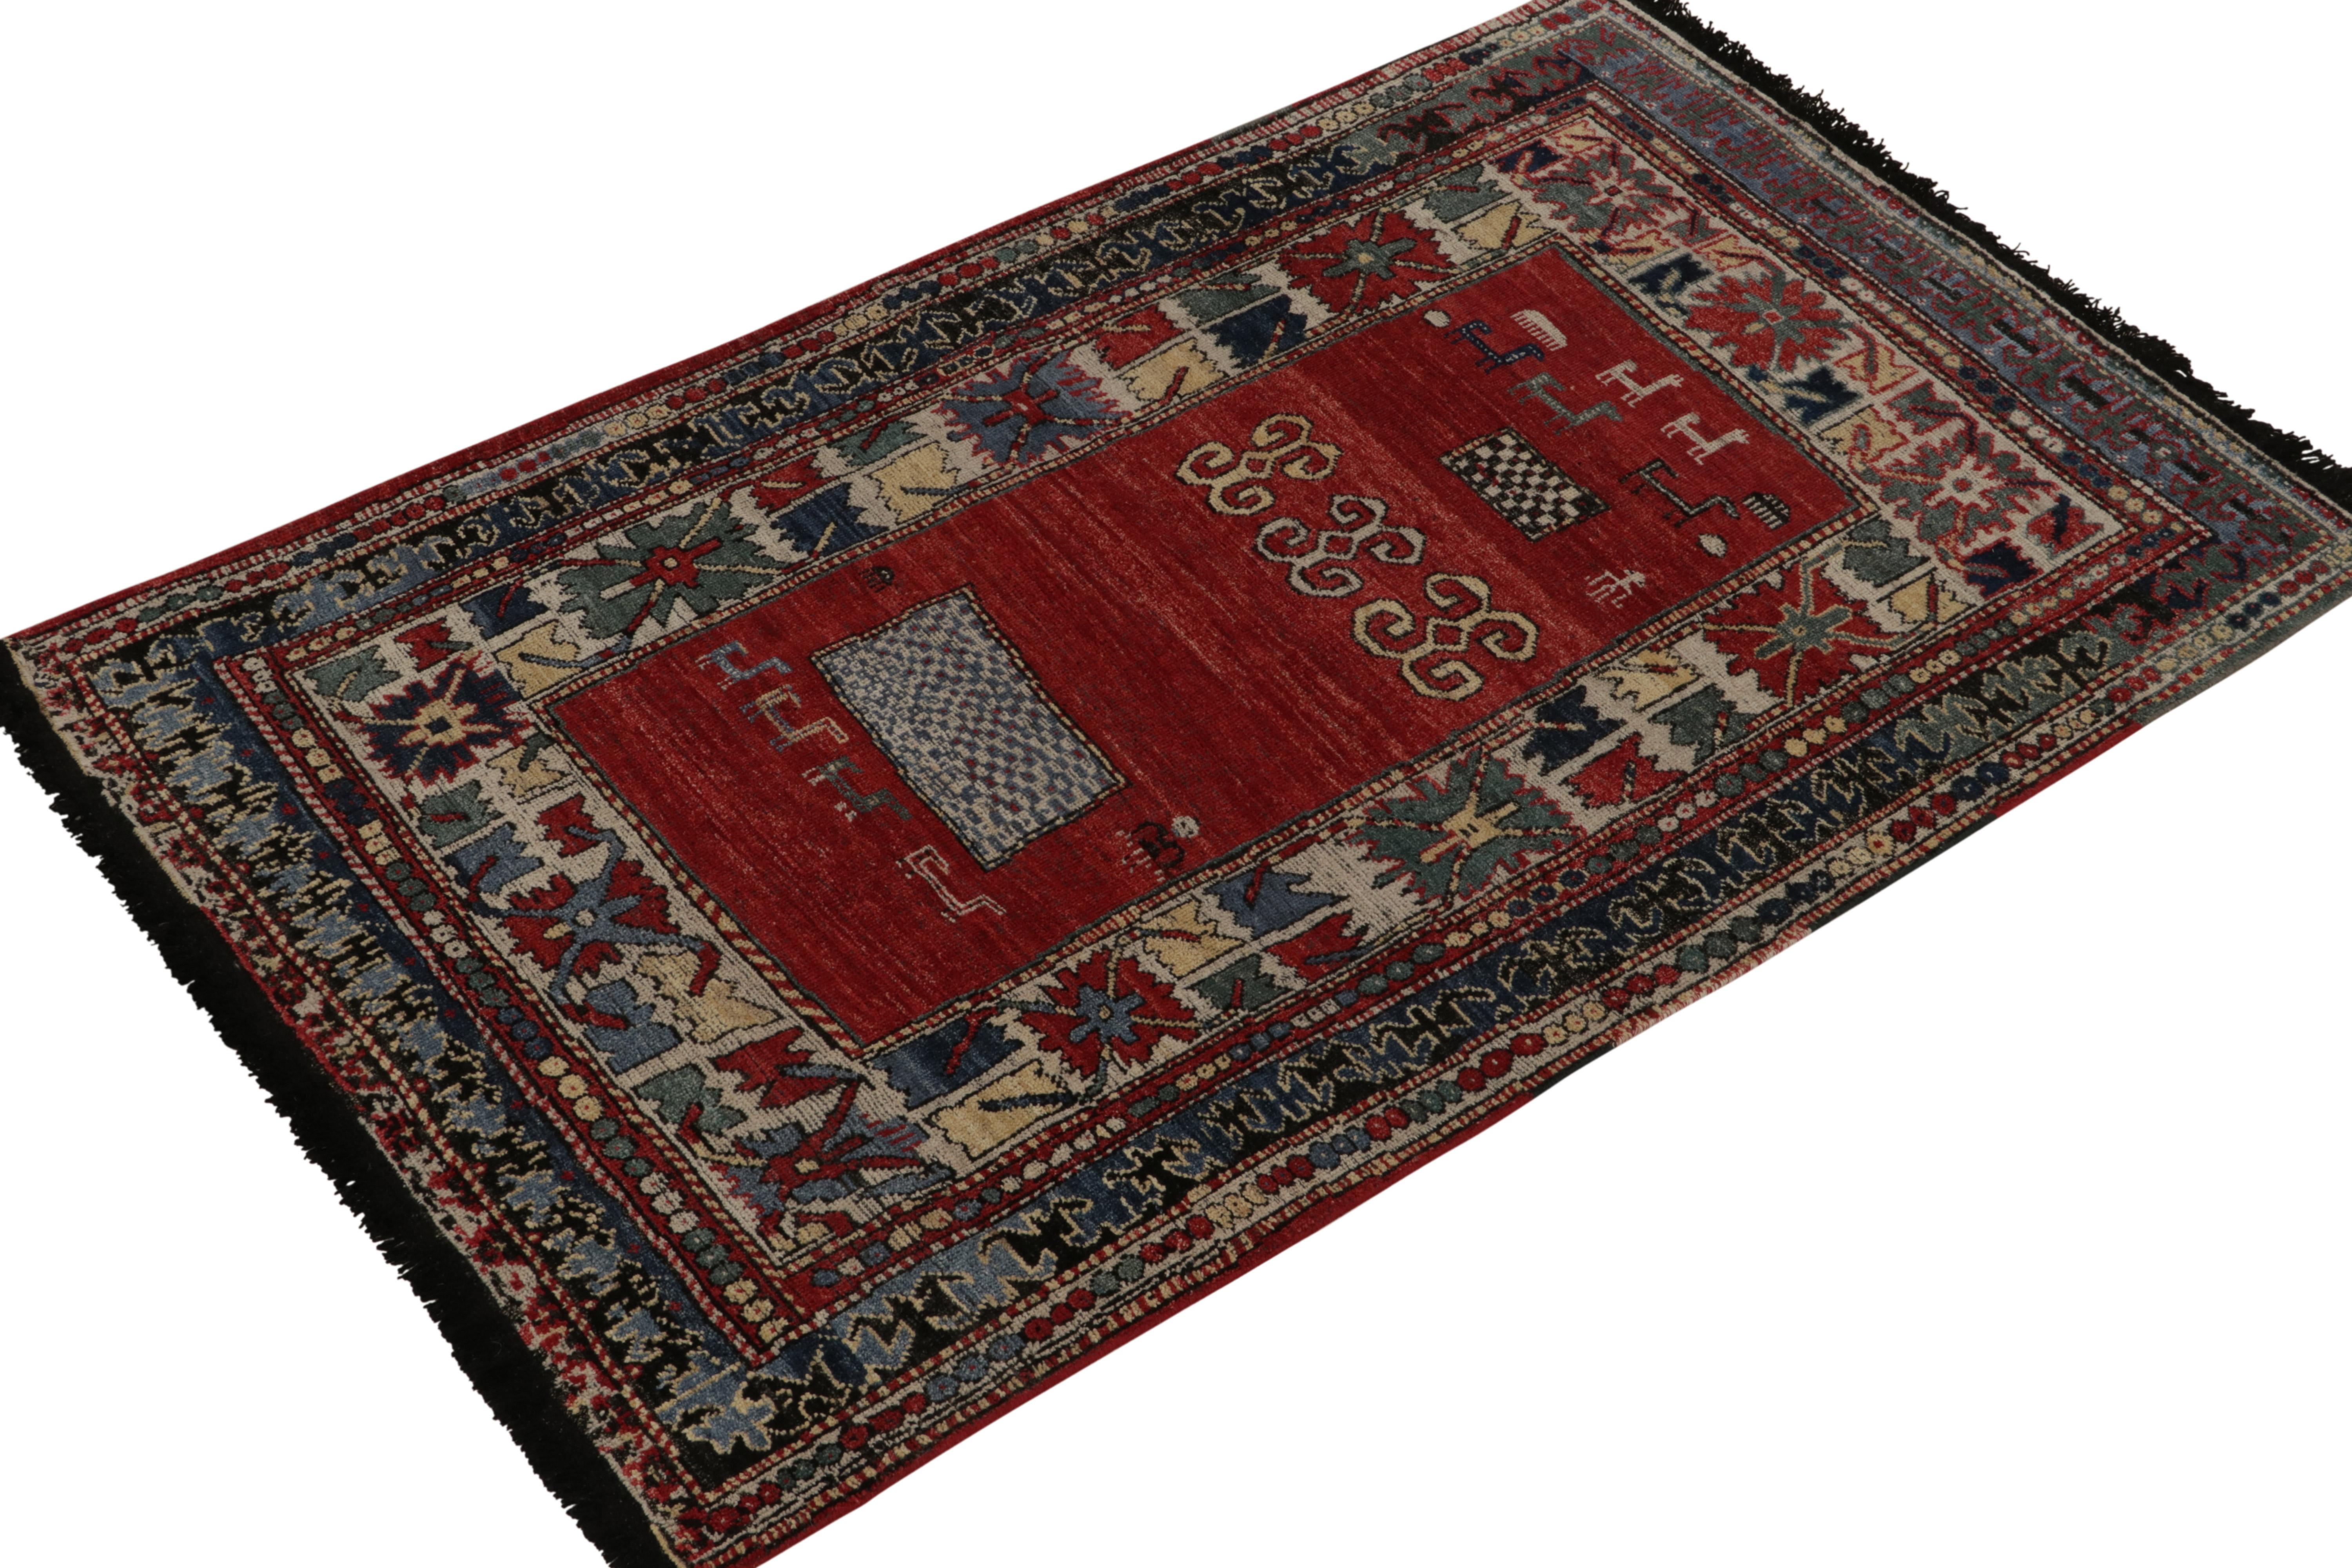 Hand-knotted in wool, a 4x7 piece inspired by antique Turkmen tribal rugs—from Rug & Kilim’s extensive Burano Black-Weft Collection. 

The carpet draws on tribal patterns in scarlet red, blue & light-gold concluding to handsome, tasteful black